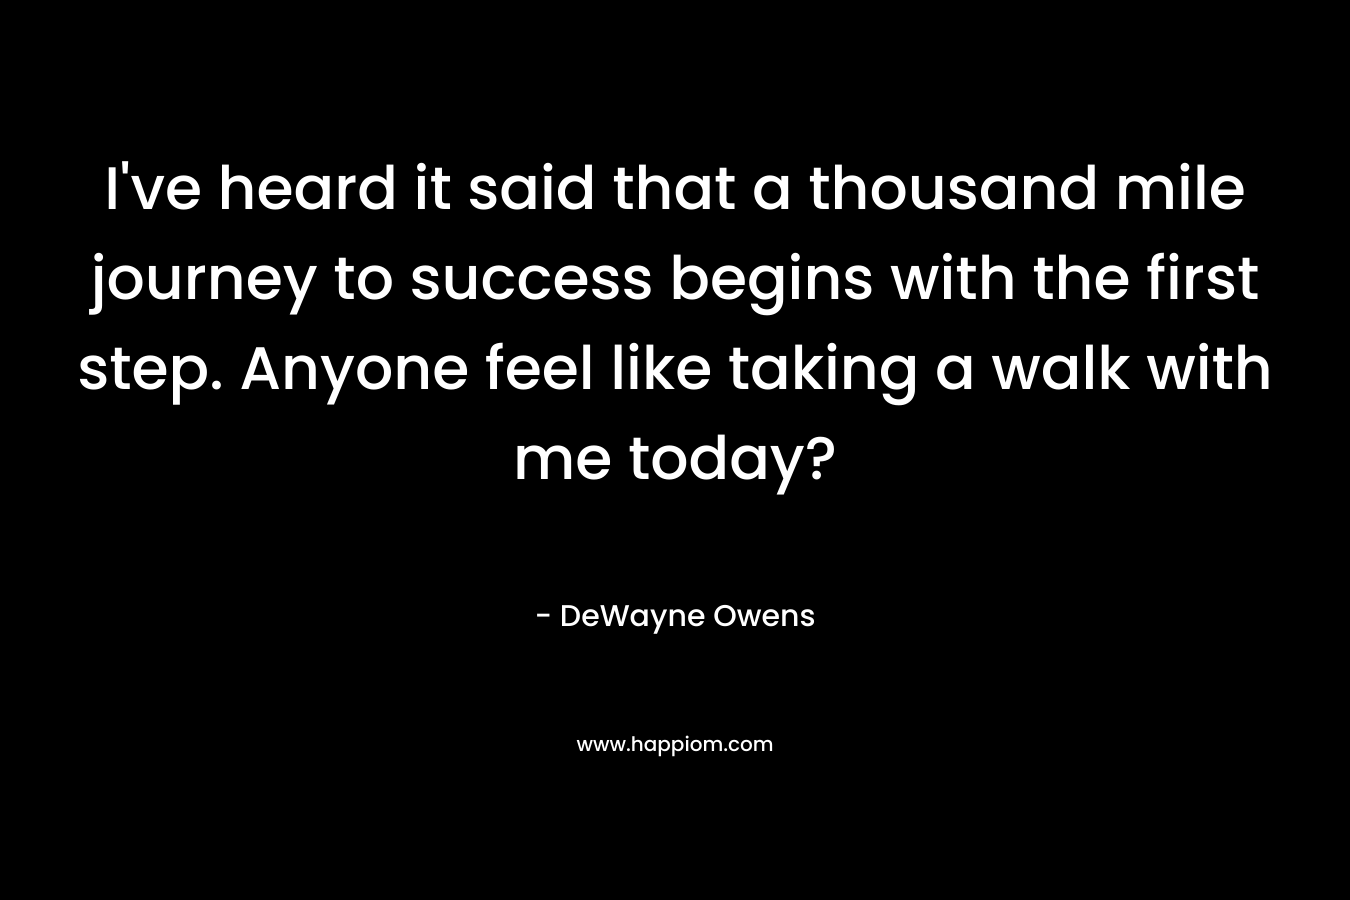 I’ve heard it said that a thousand mile journey to success begins with the first step. Anyone feel like taking a walk with me today? – DeWayne Owens